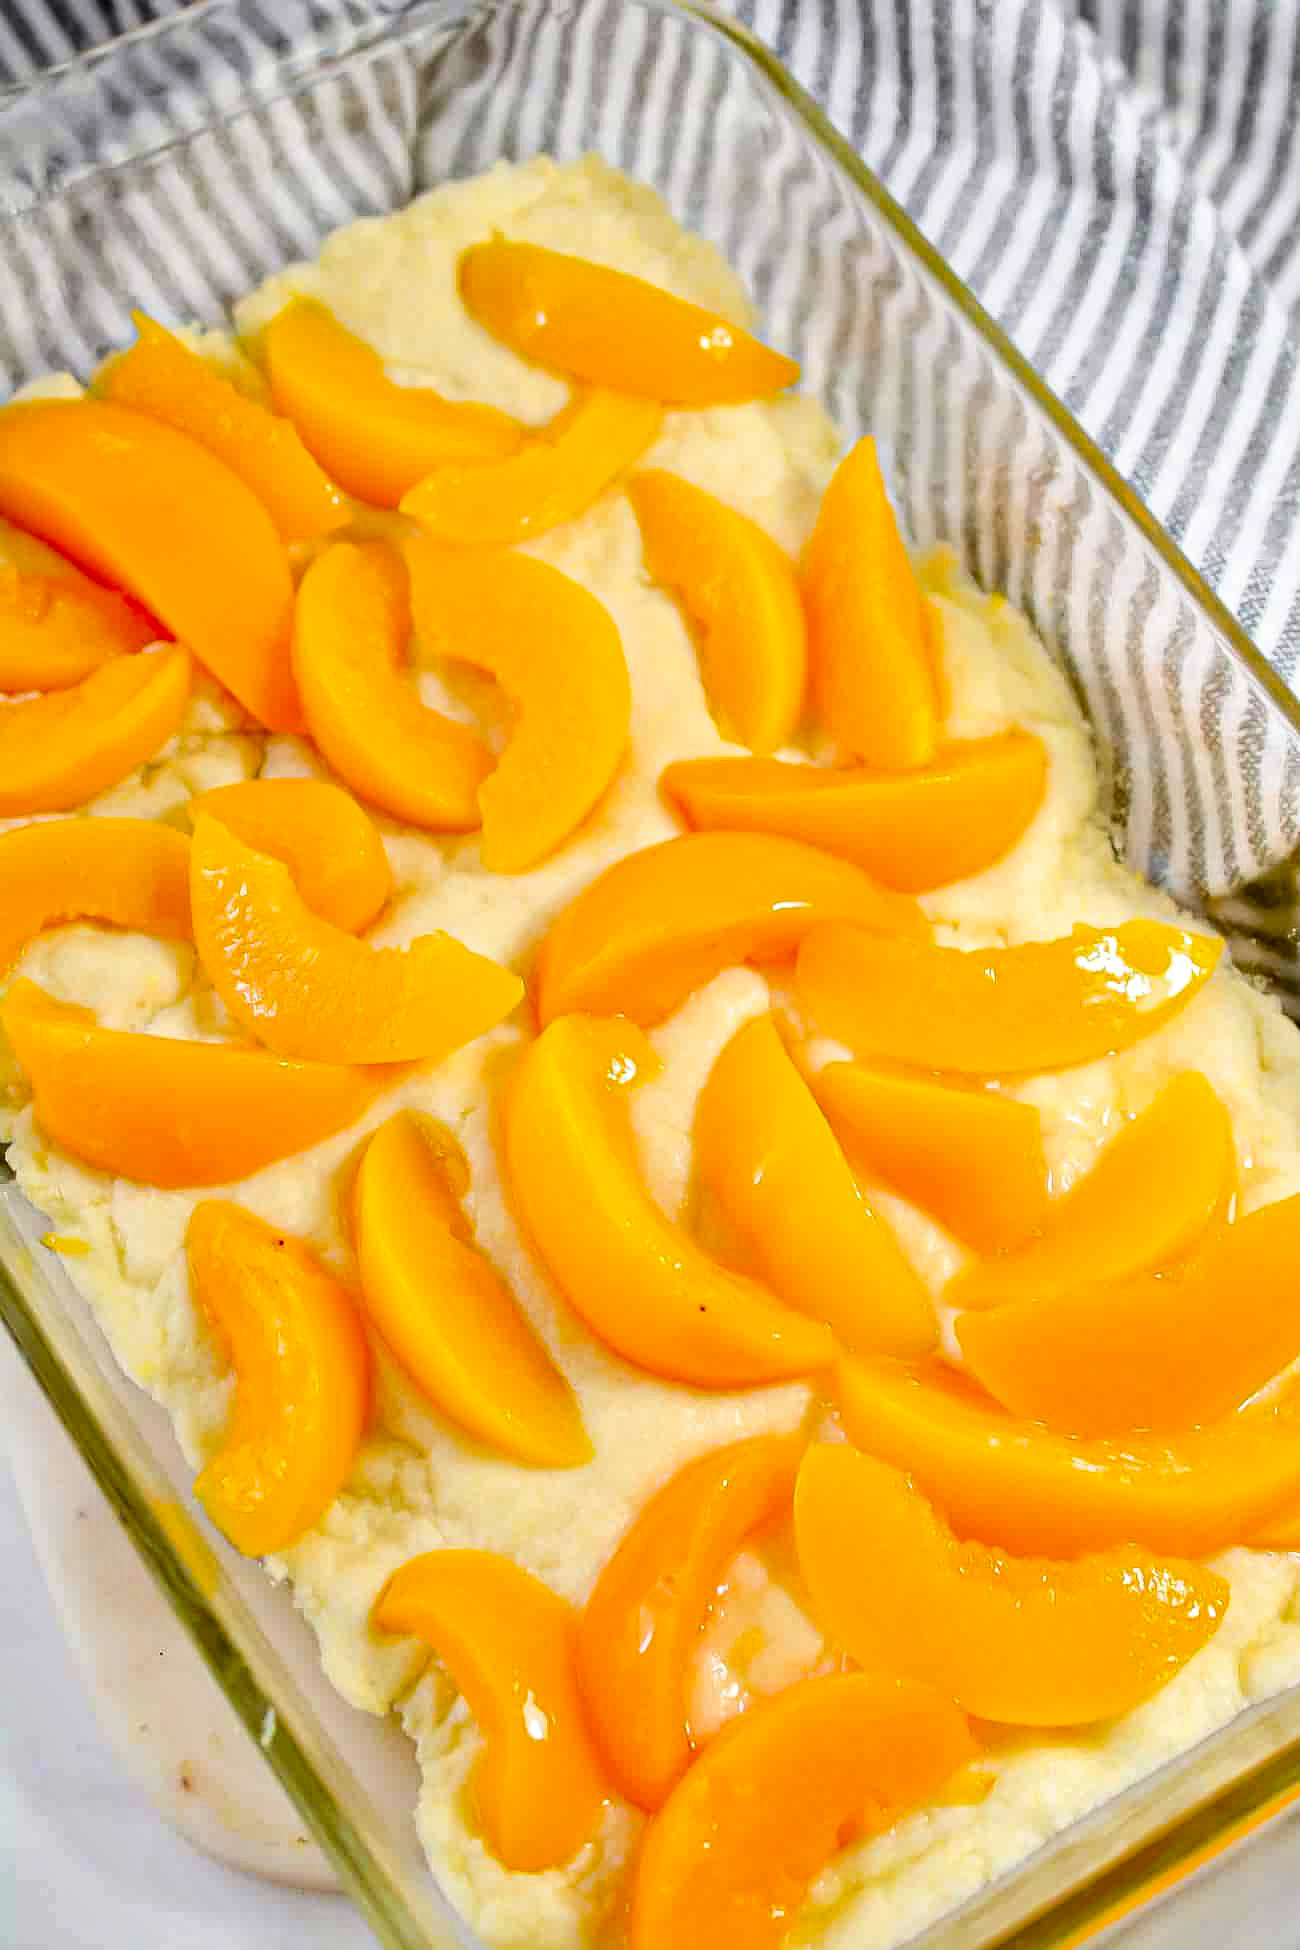 Spread the drained peaches over the pre-baked crust